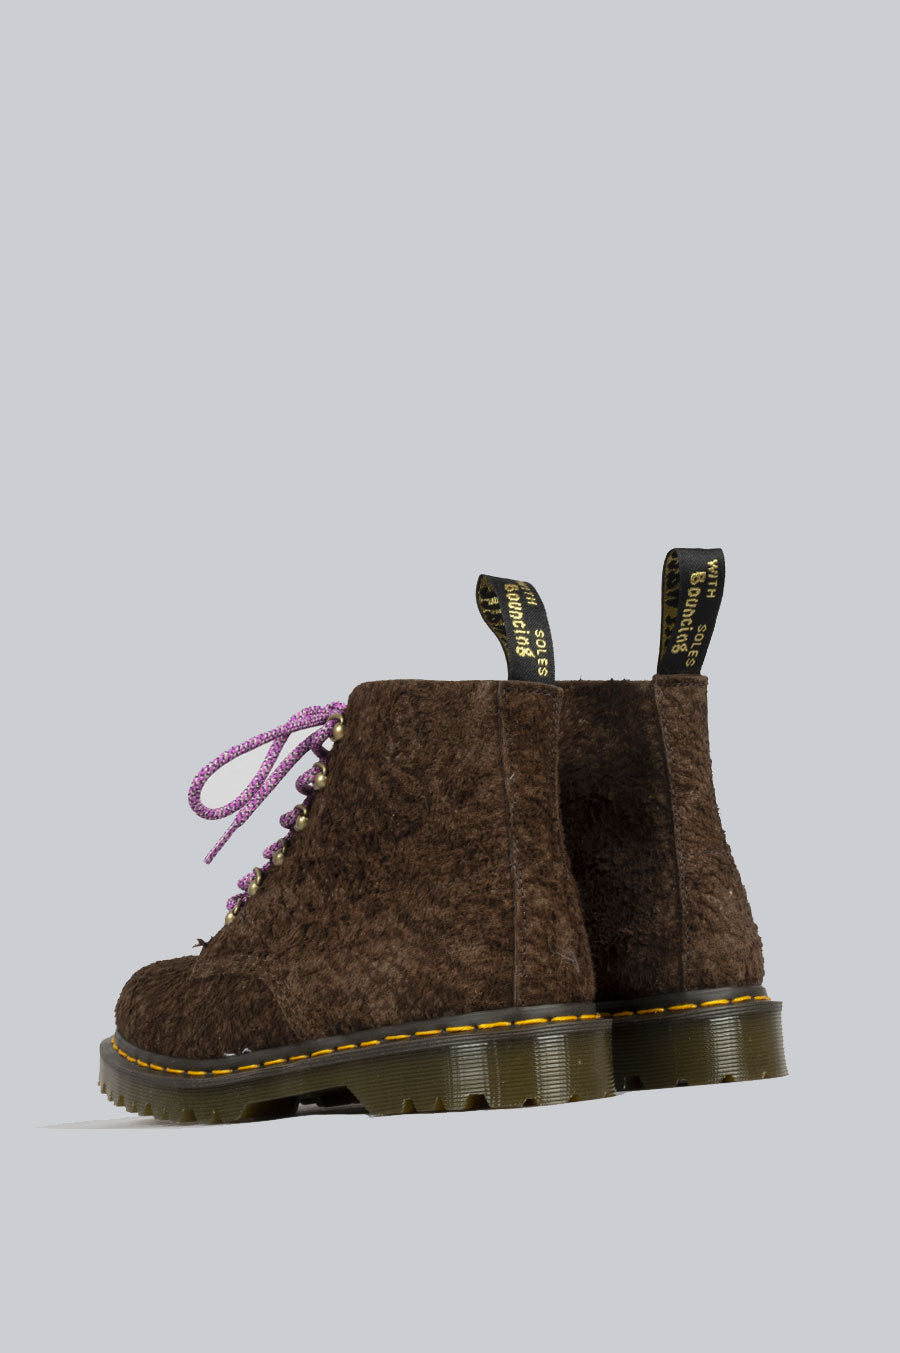 DR MARTENS 101 MADE IN ENGLAND HARDWARE SUEDE ANKLE BOOTS DARK BROWN